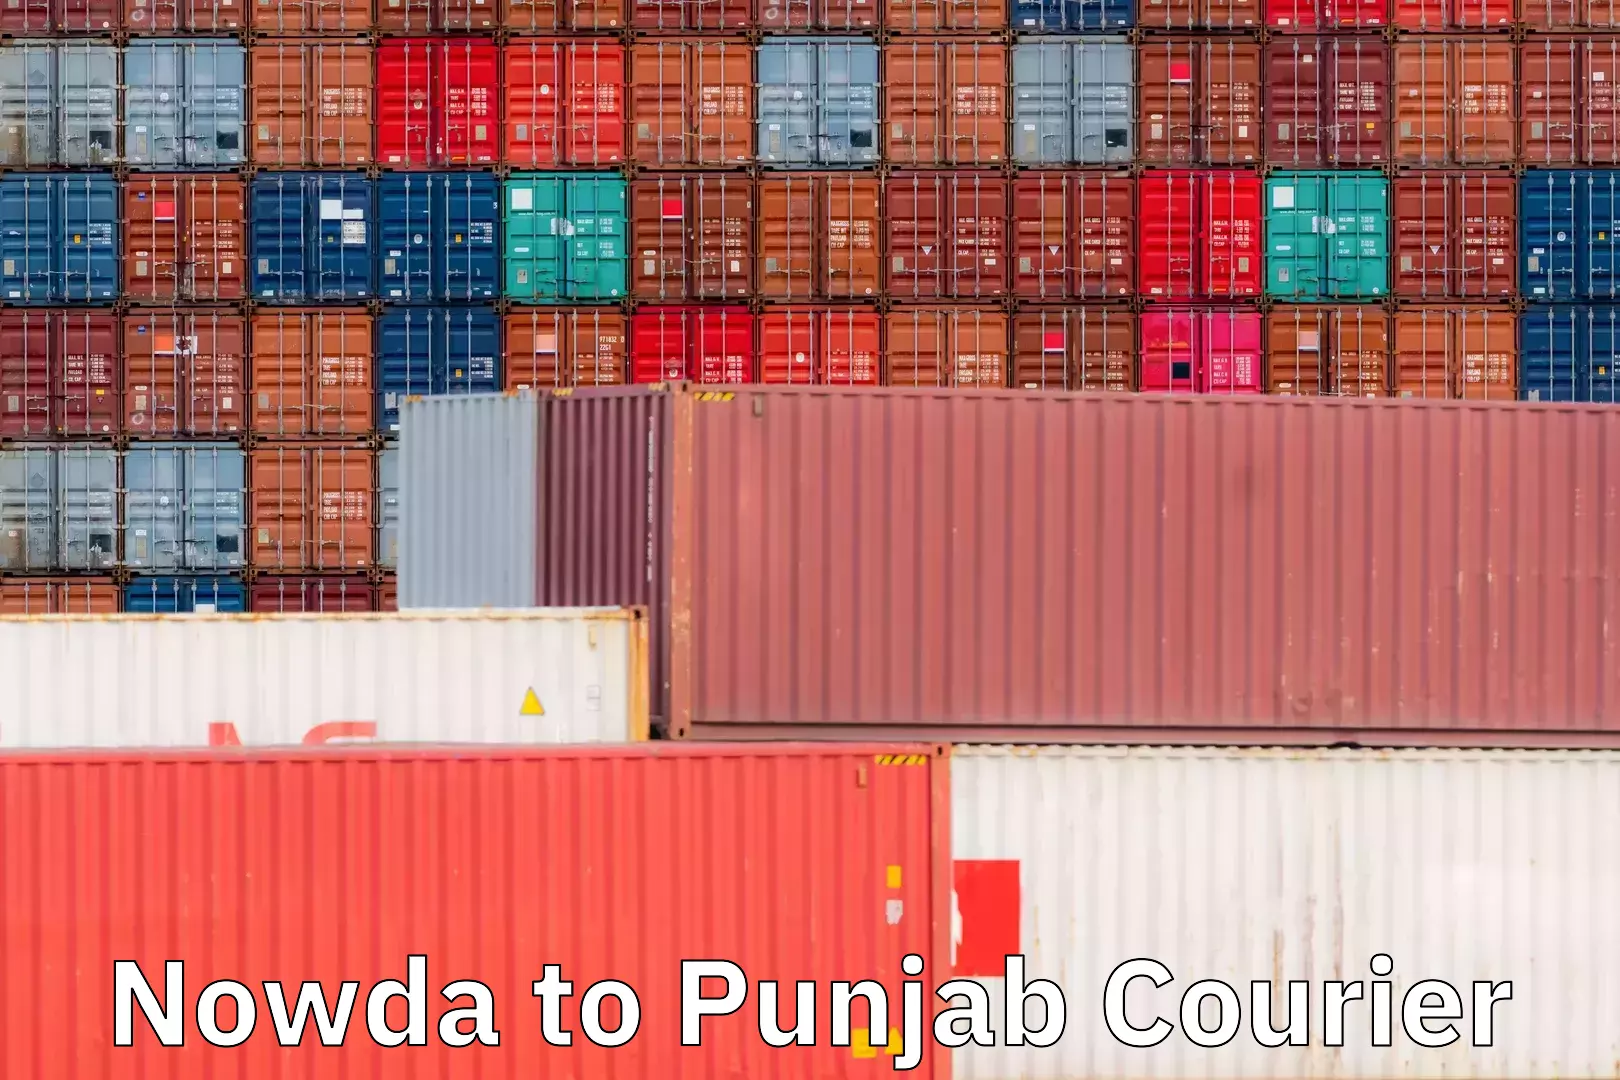 State-of-the-art courier technology Nowda to Punjab